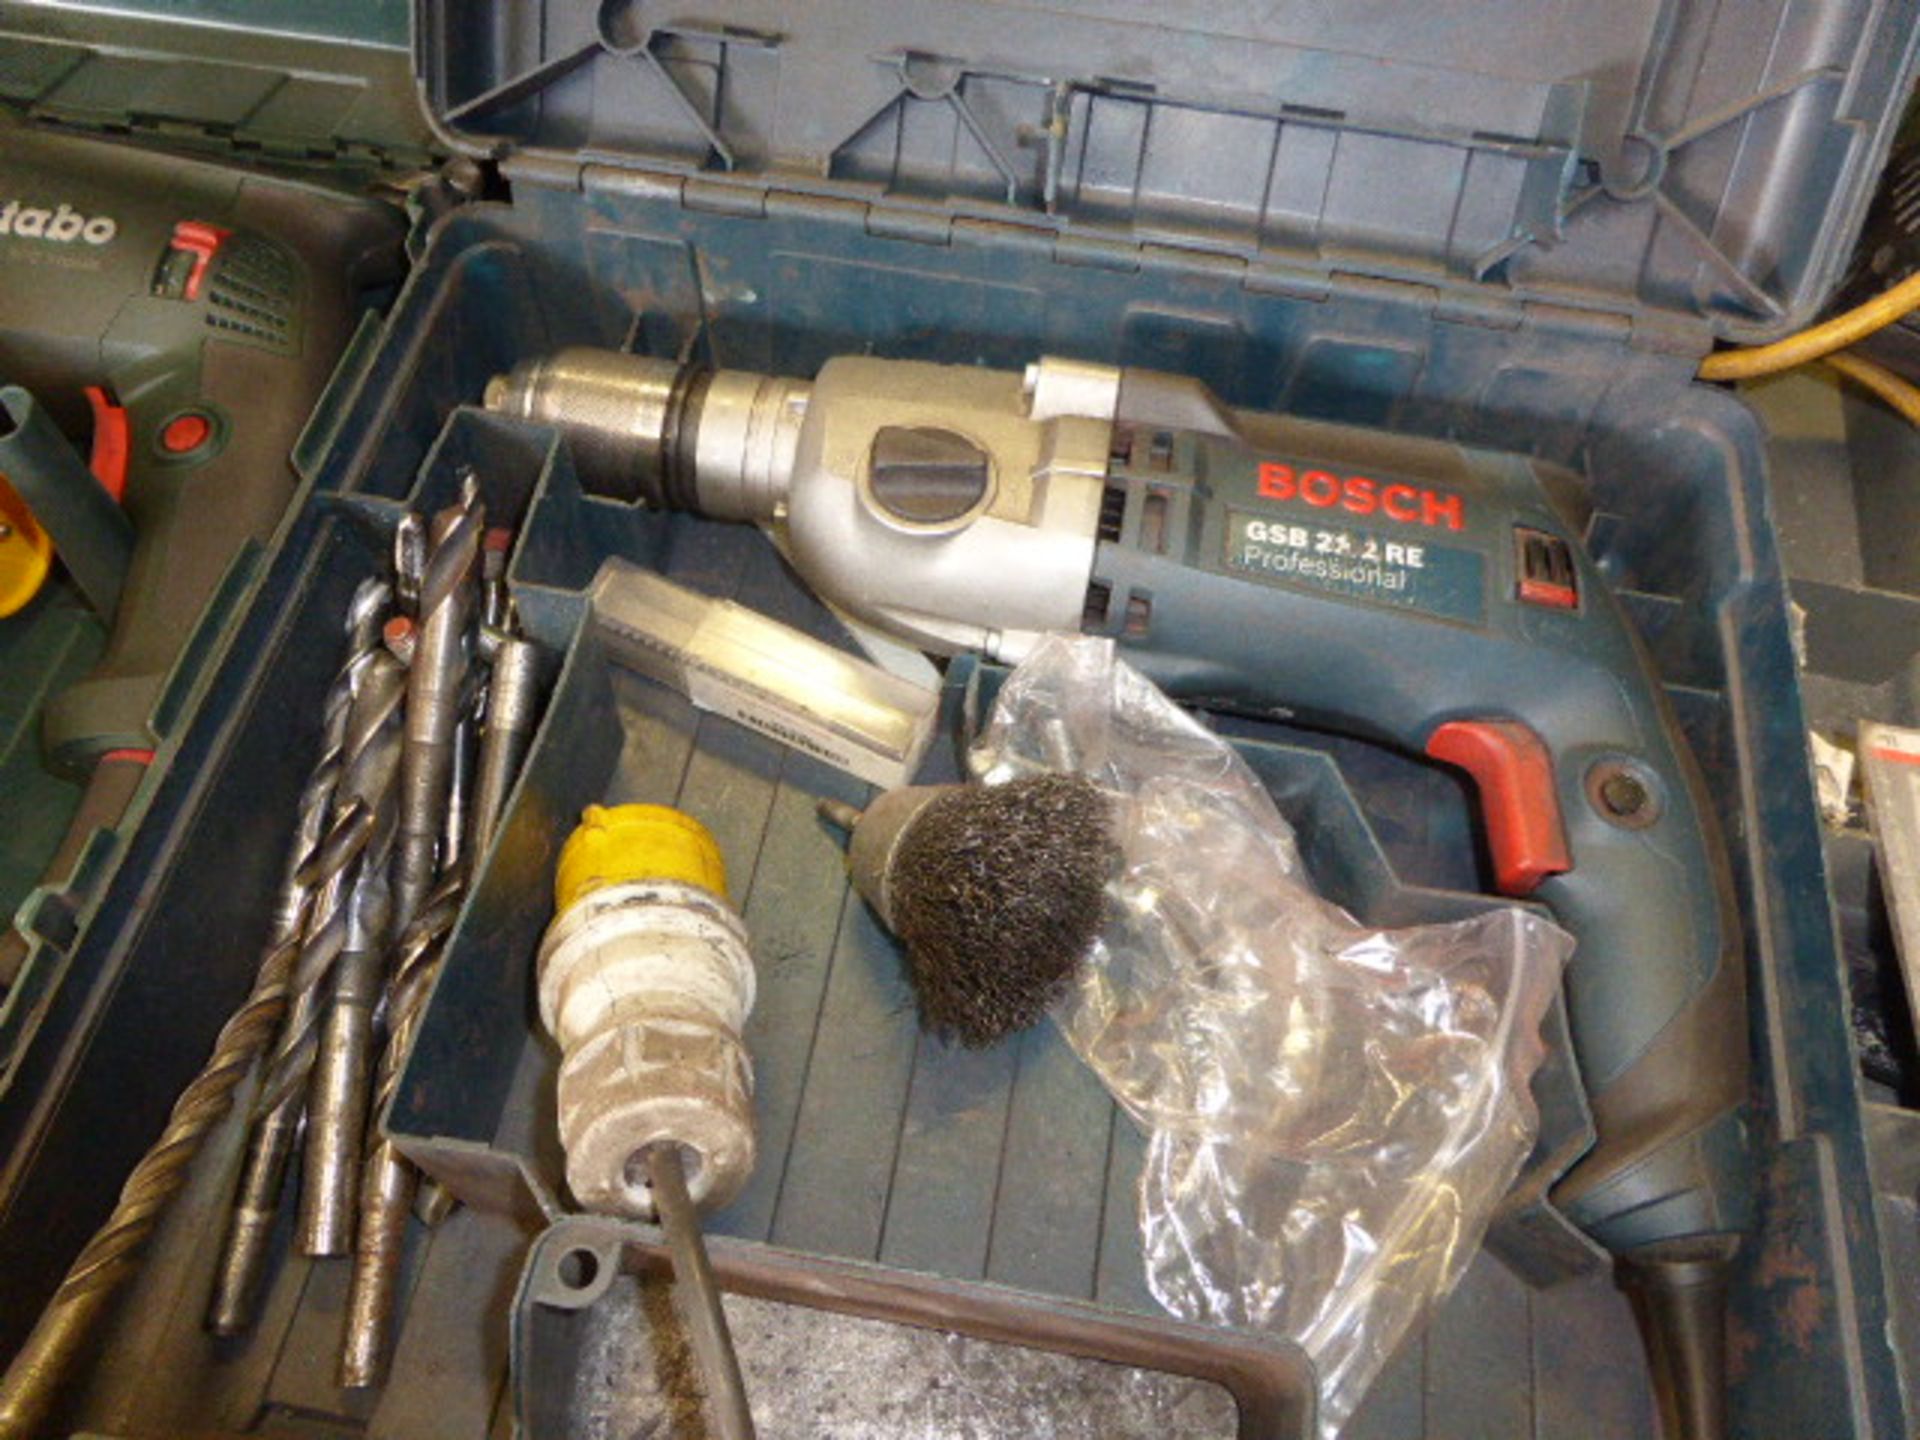 Bosch model GSB212RE professional drill 110 volt with case and accessories - Image 2 of 2